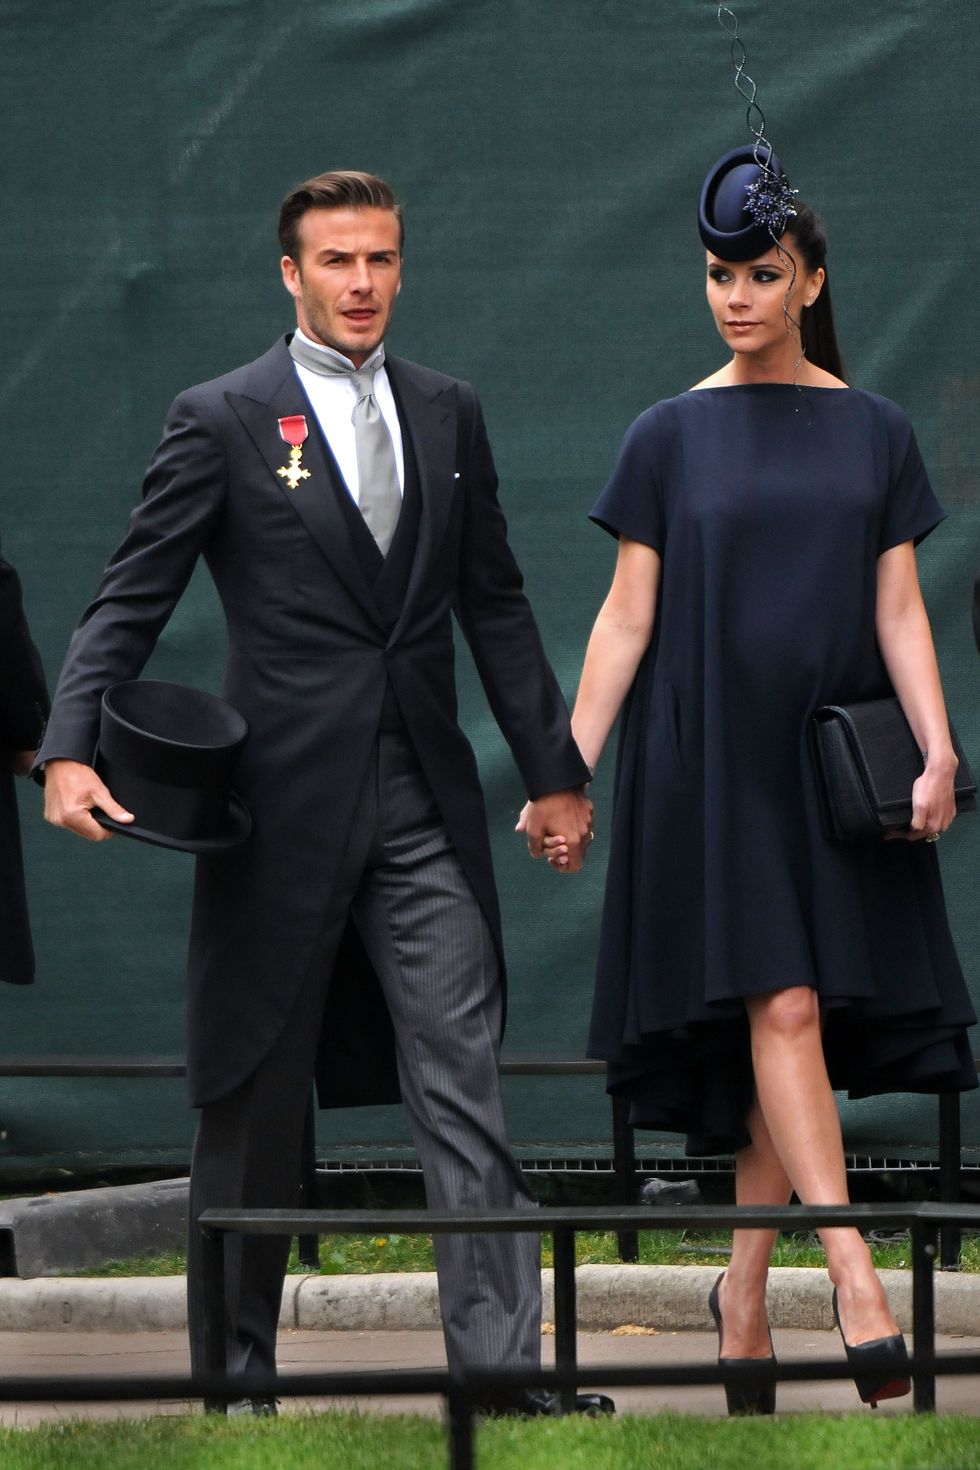 david beckham and victoria beckham walk hand in had on a sidewalk, he wears a dark three piece suit with a long jacket and holds a top hat, she wears a navy dress and matching hat